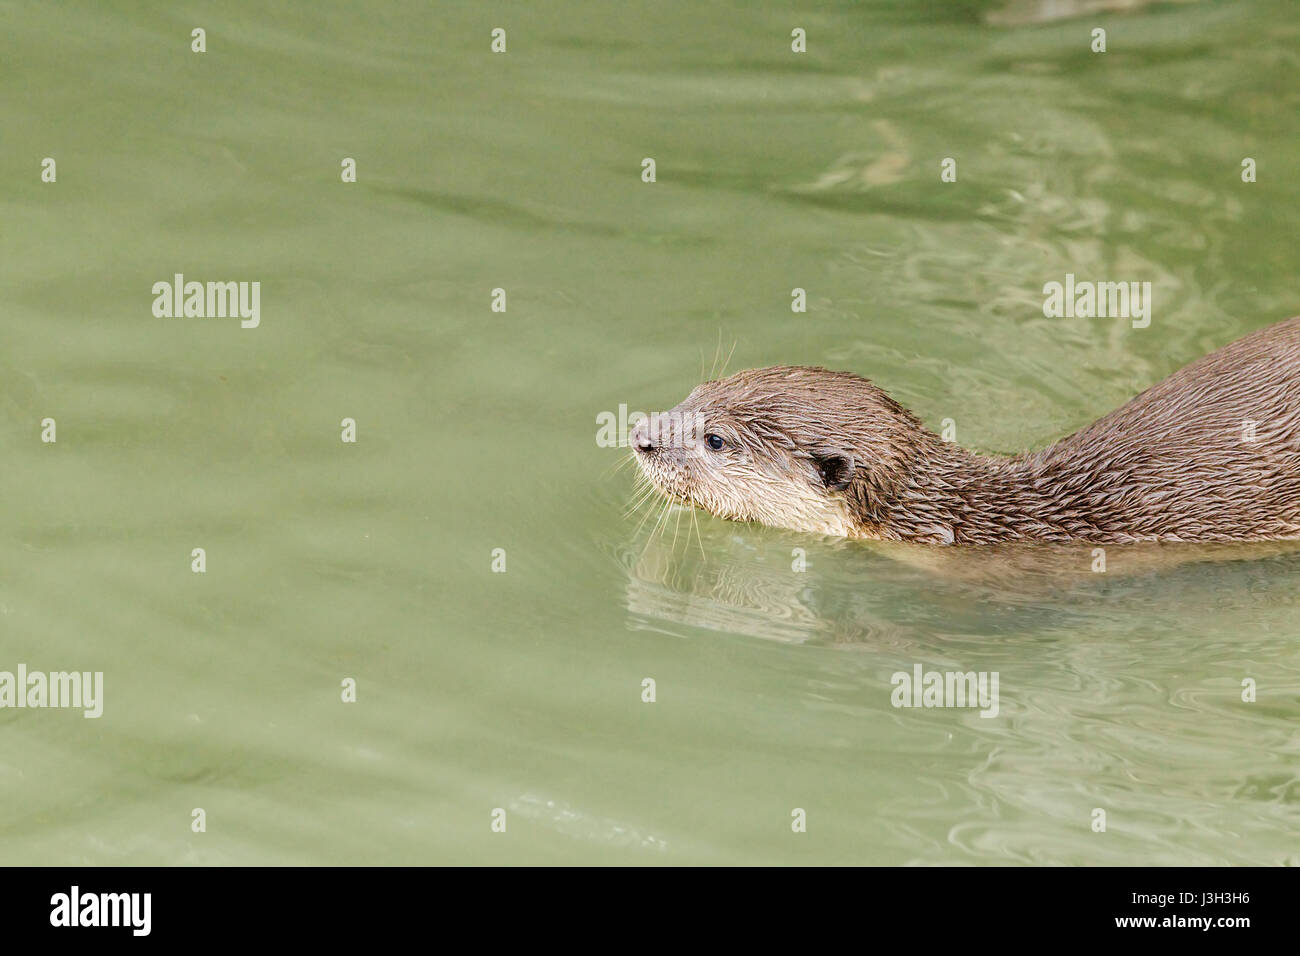 A Smooth-coated otter (Lutrogale perspicillata) cub in a mangrove river, Singapore Stock Photo